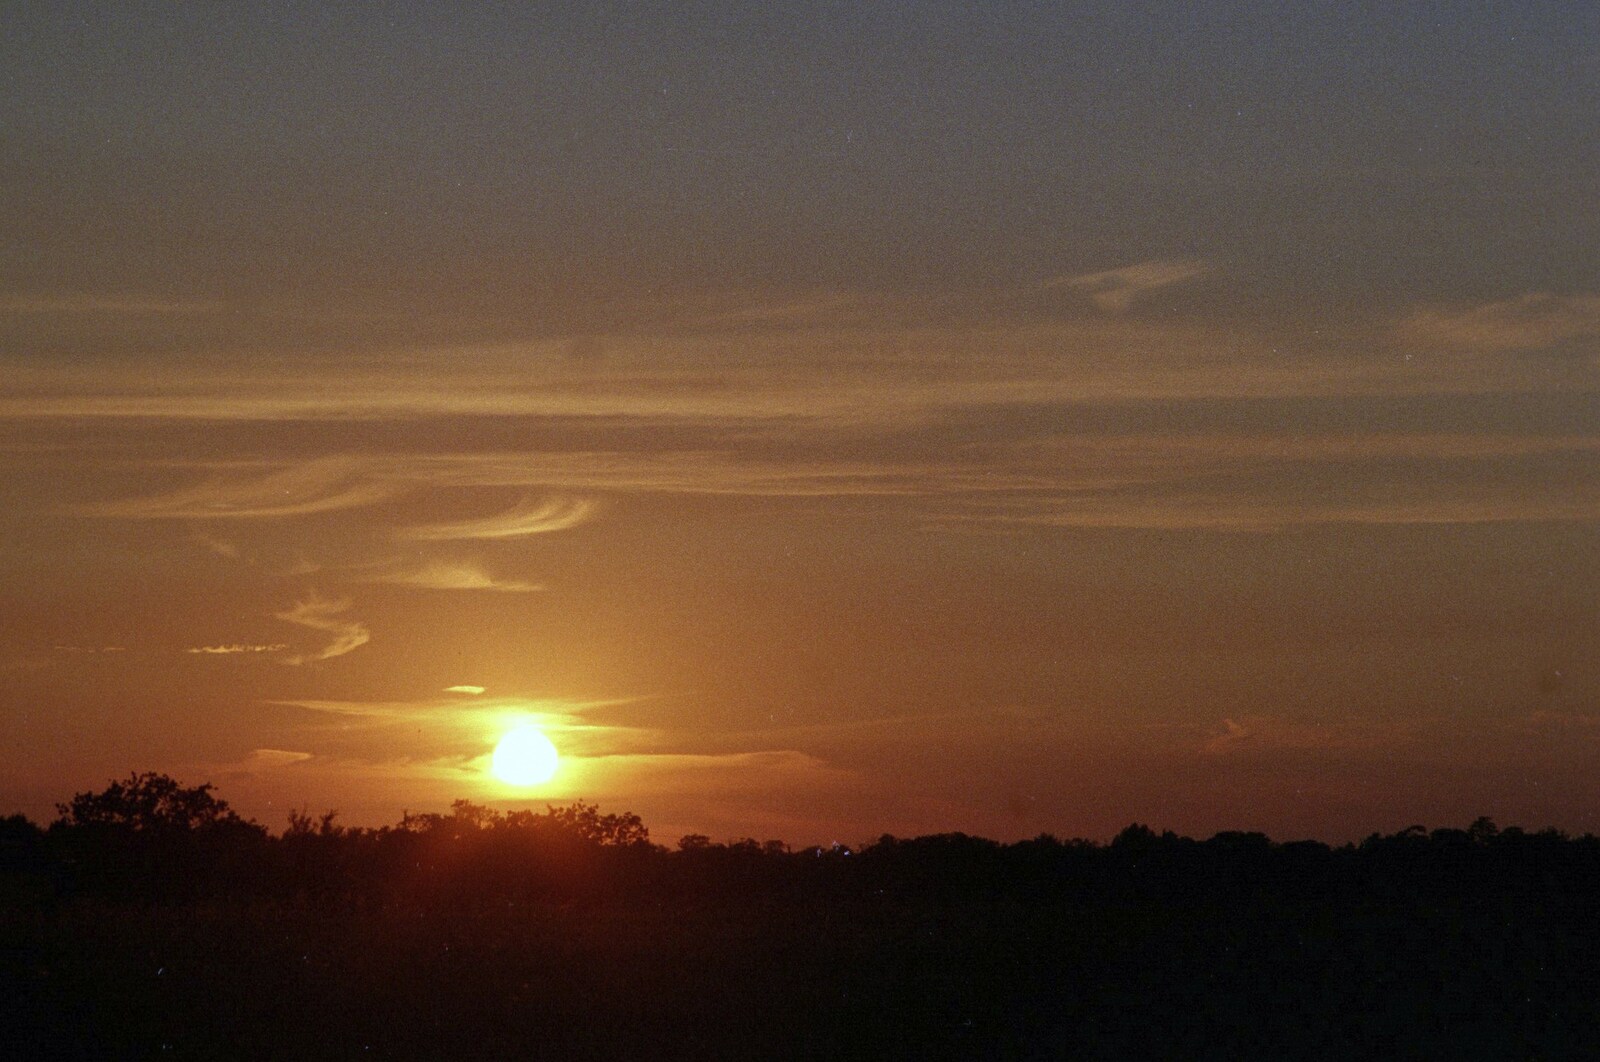 A sunset somewhere from A Walk to Thrandeston, Suffolk - 29th June 1991